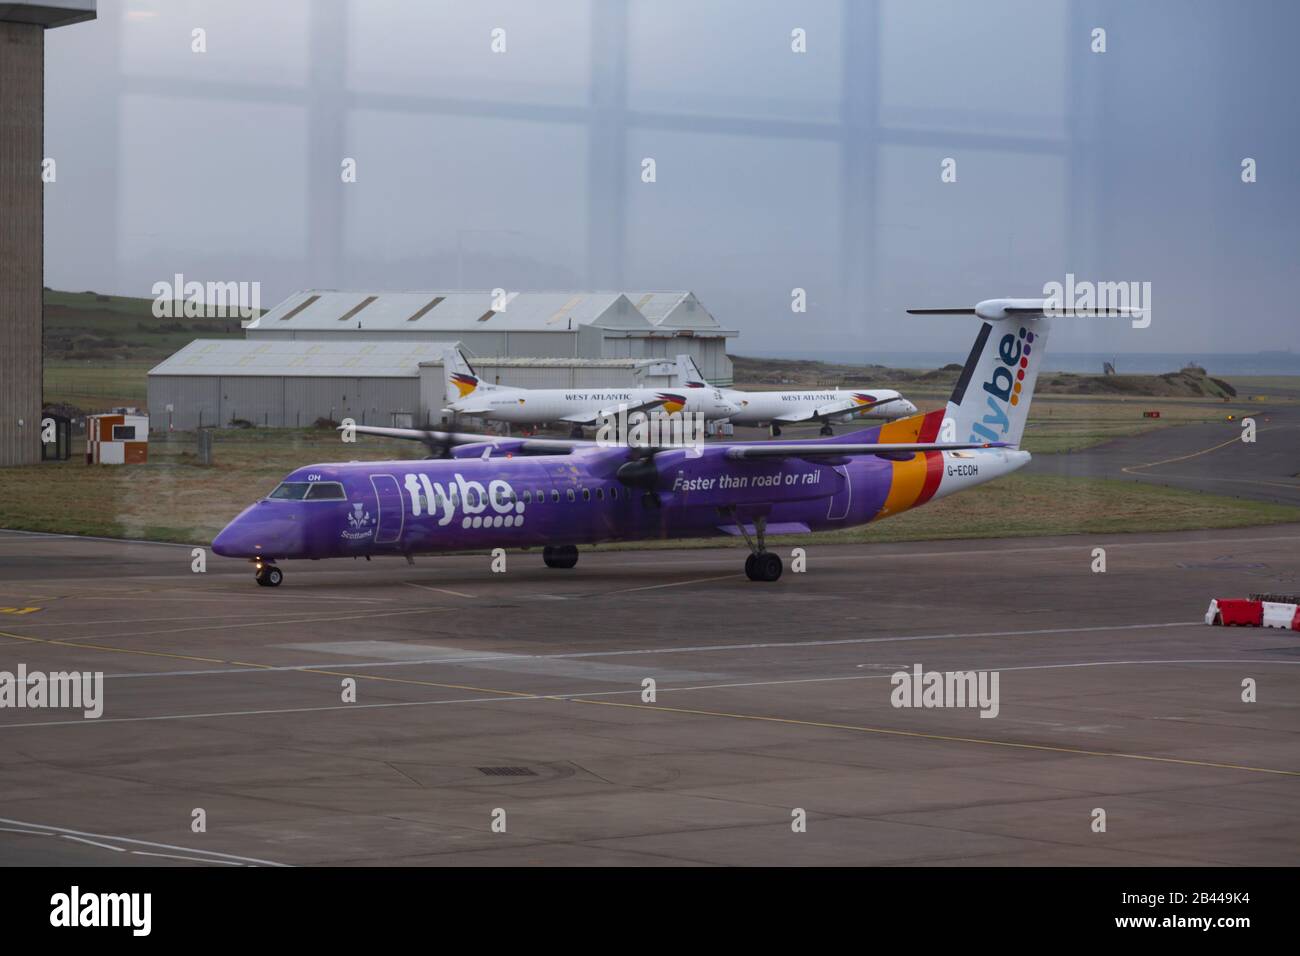 4 February 2020: FlyBe plane arriving at Isle of Man Airport seen through the departure lounge window. The airline company, Flybe,entered Administration (collapsed) on 5 March 2020. All flights have been grounded and the UK business has ceased trading with immediate effect. The collapse was partially blamed on COVID-19 making FlyBe is the Uk's 'first corporate coronavirus victim'. Patches of faking paint can be clearly seen on the body of the plane. Customers are advised to monitor the Civil Aviation Authority website. Stock Photo